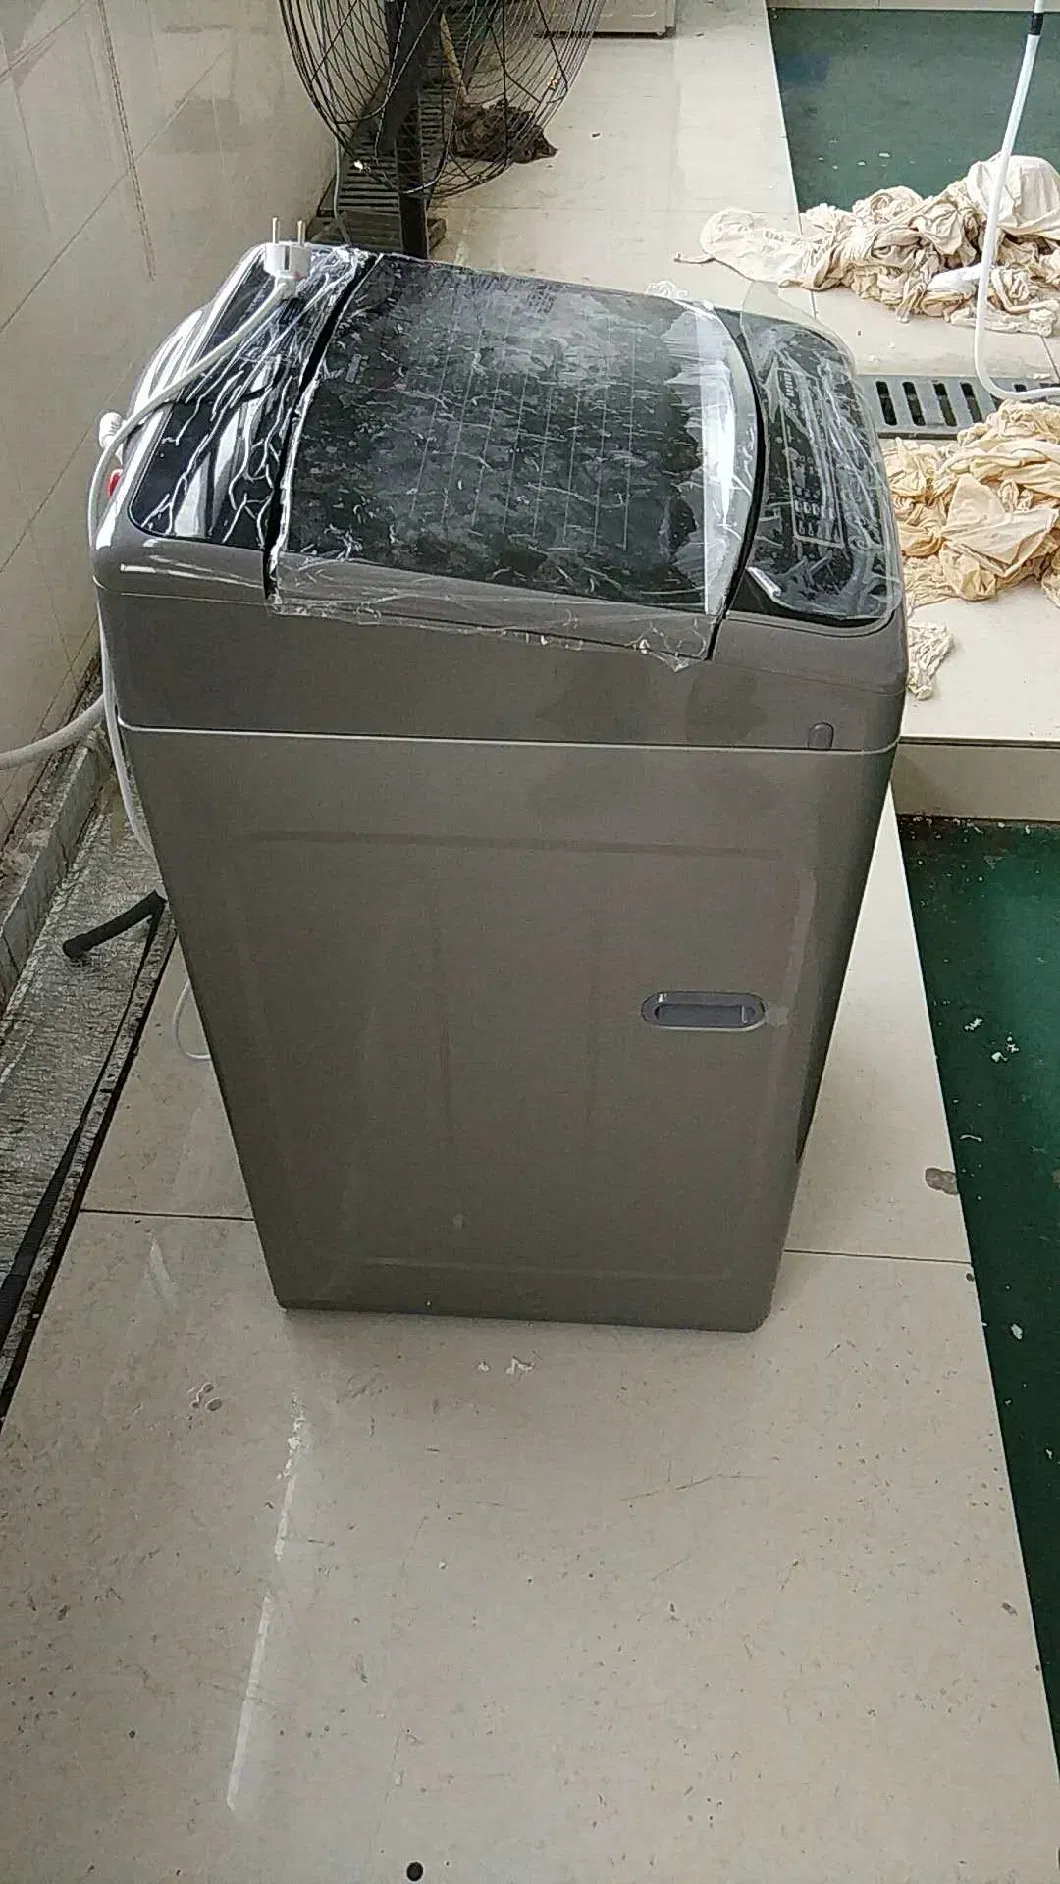 Home Use Fully Automatic 8kg 10kg and 12kg Washing Capacity Clothes Washer Top Loading Commercial Industrial Hotel Laundry Clothes Washing Machine